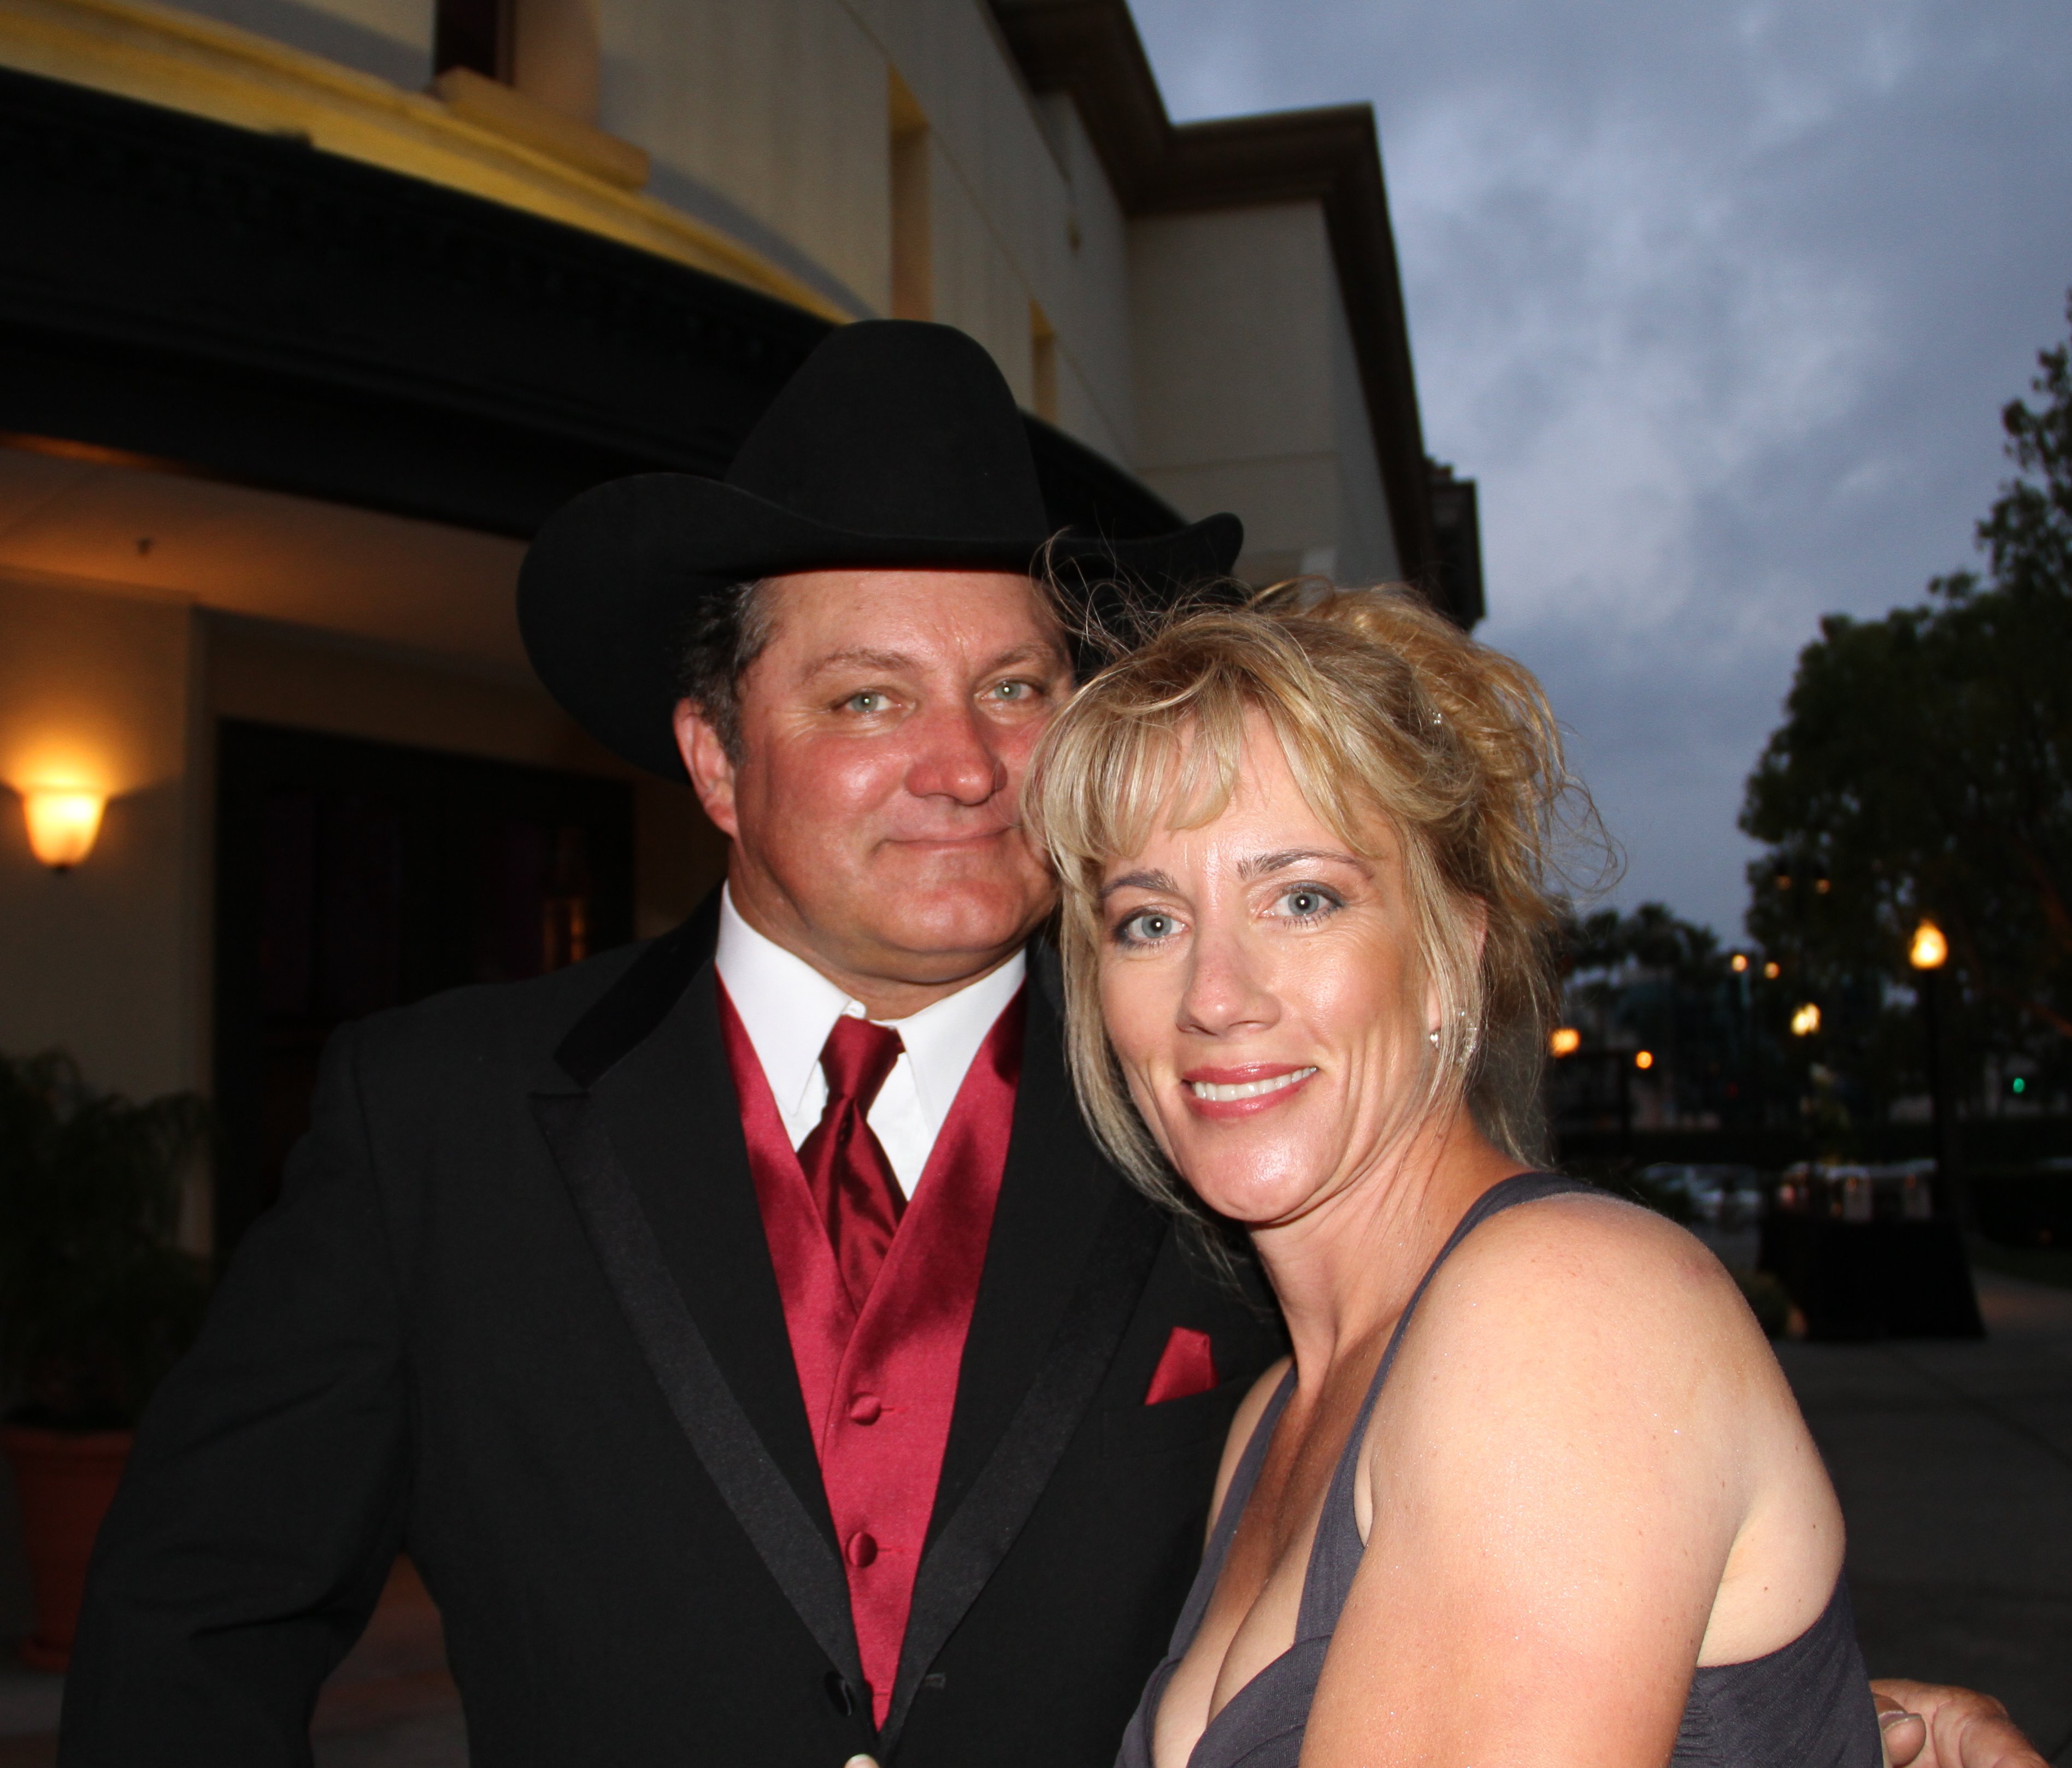 Tad and Wife Wendy at the Stunt Awards